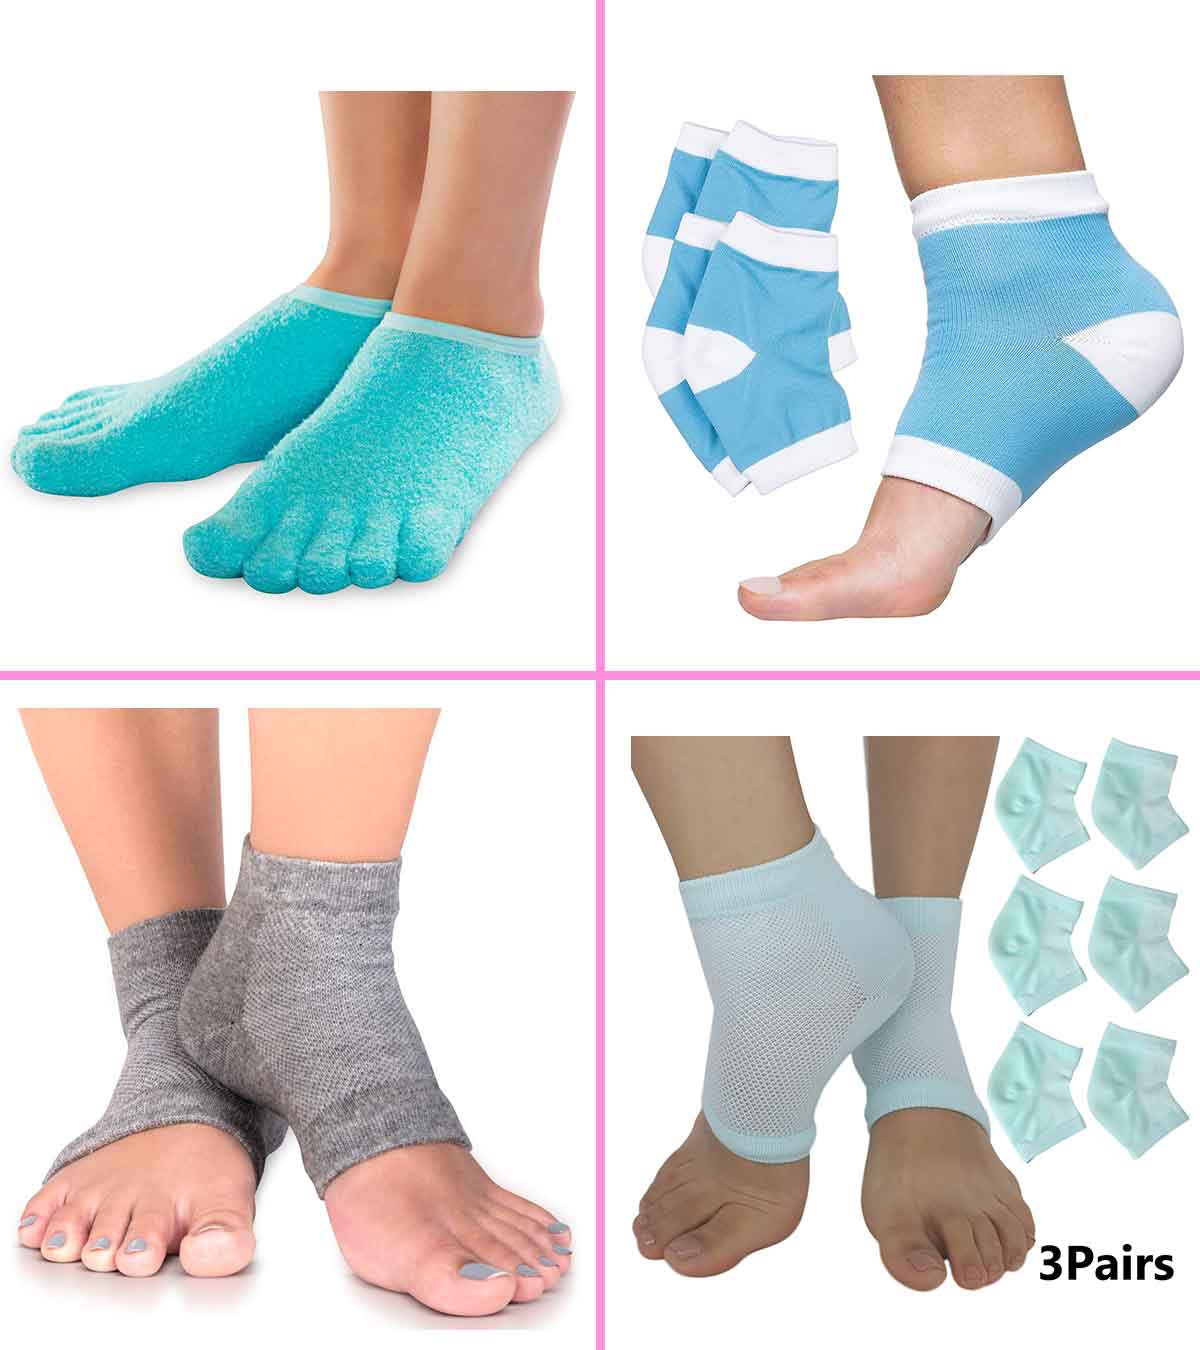 15 Best Moisturizing Socks In 2023, According To Beauty Experts